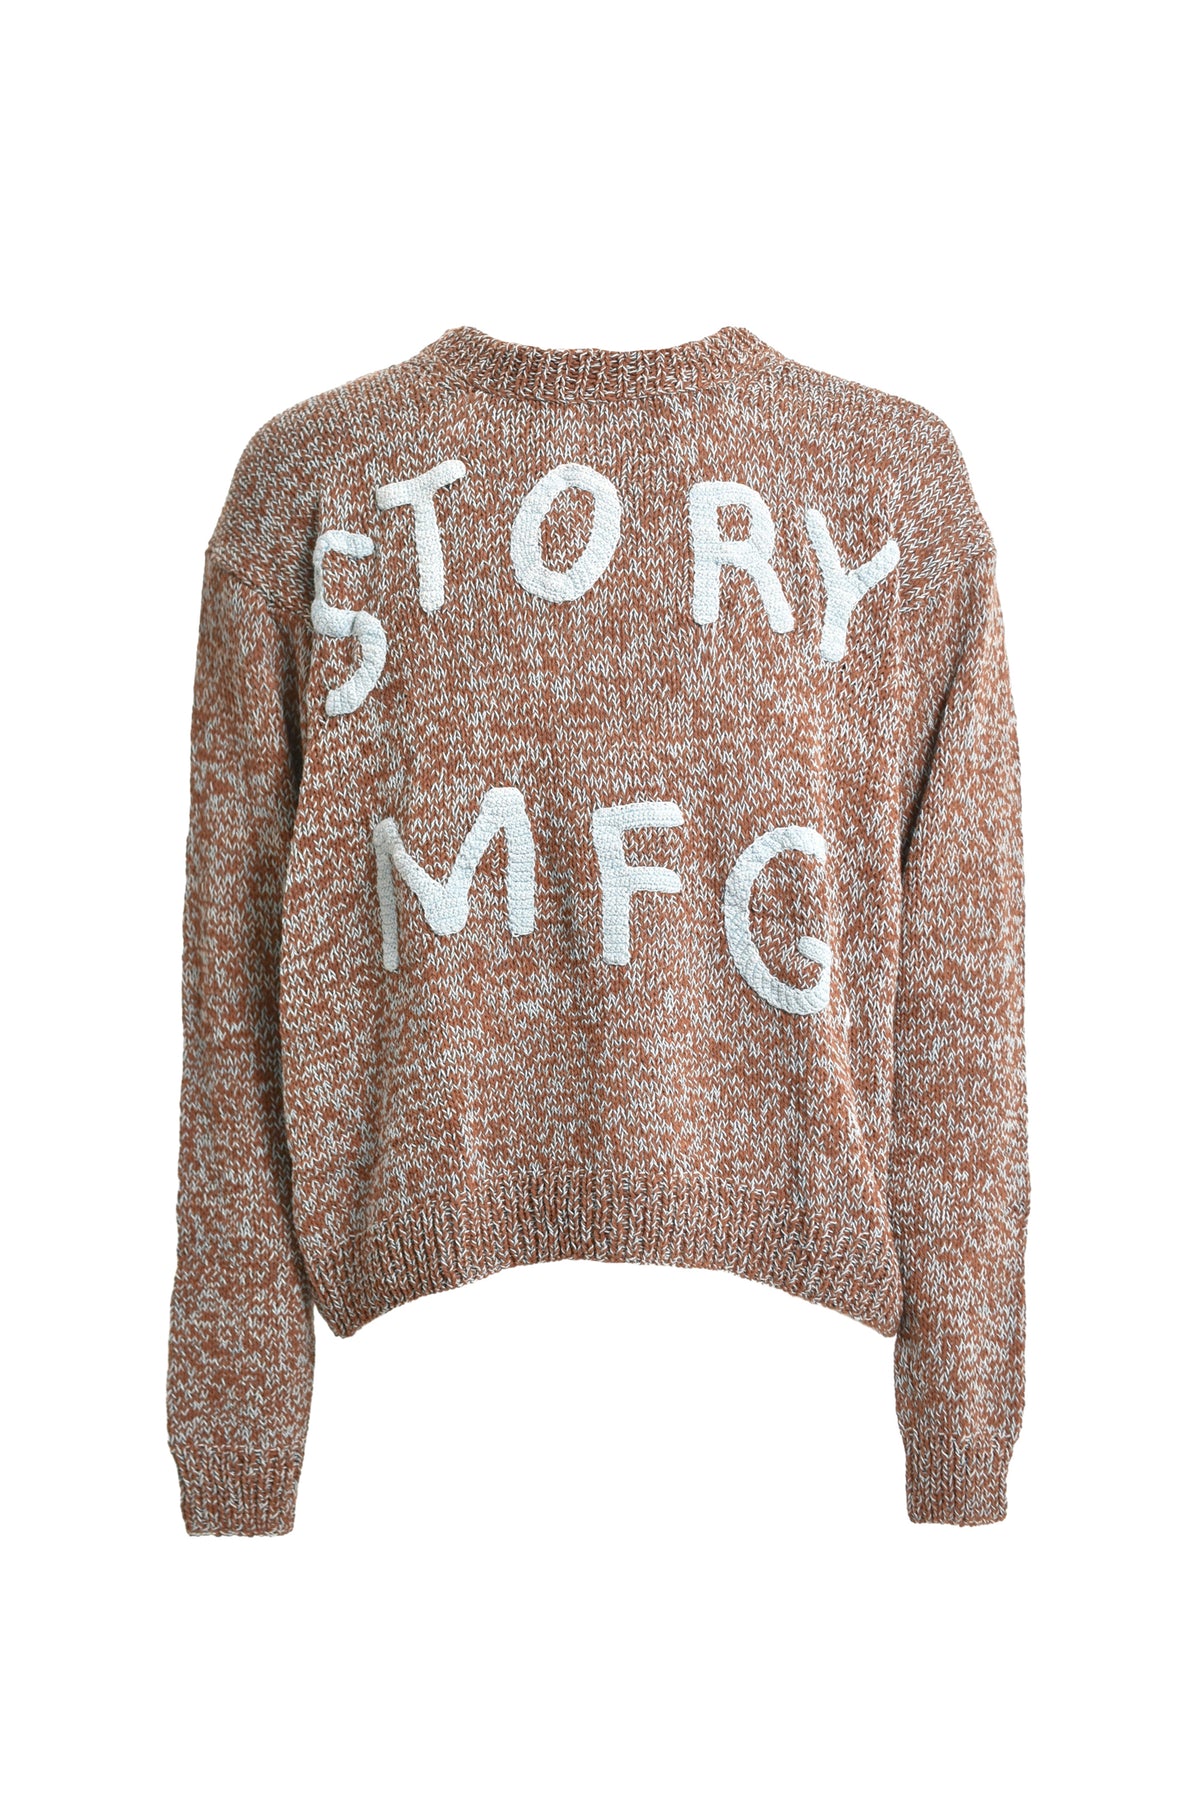 STORY mfg. SPINNING JUMPER / CLASSIC TWISTED BRW